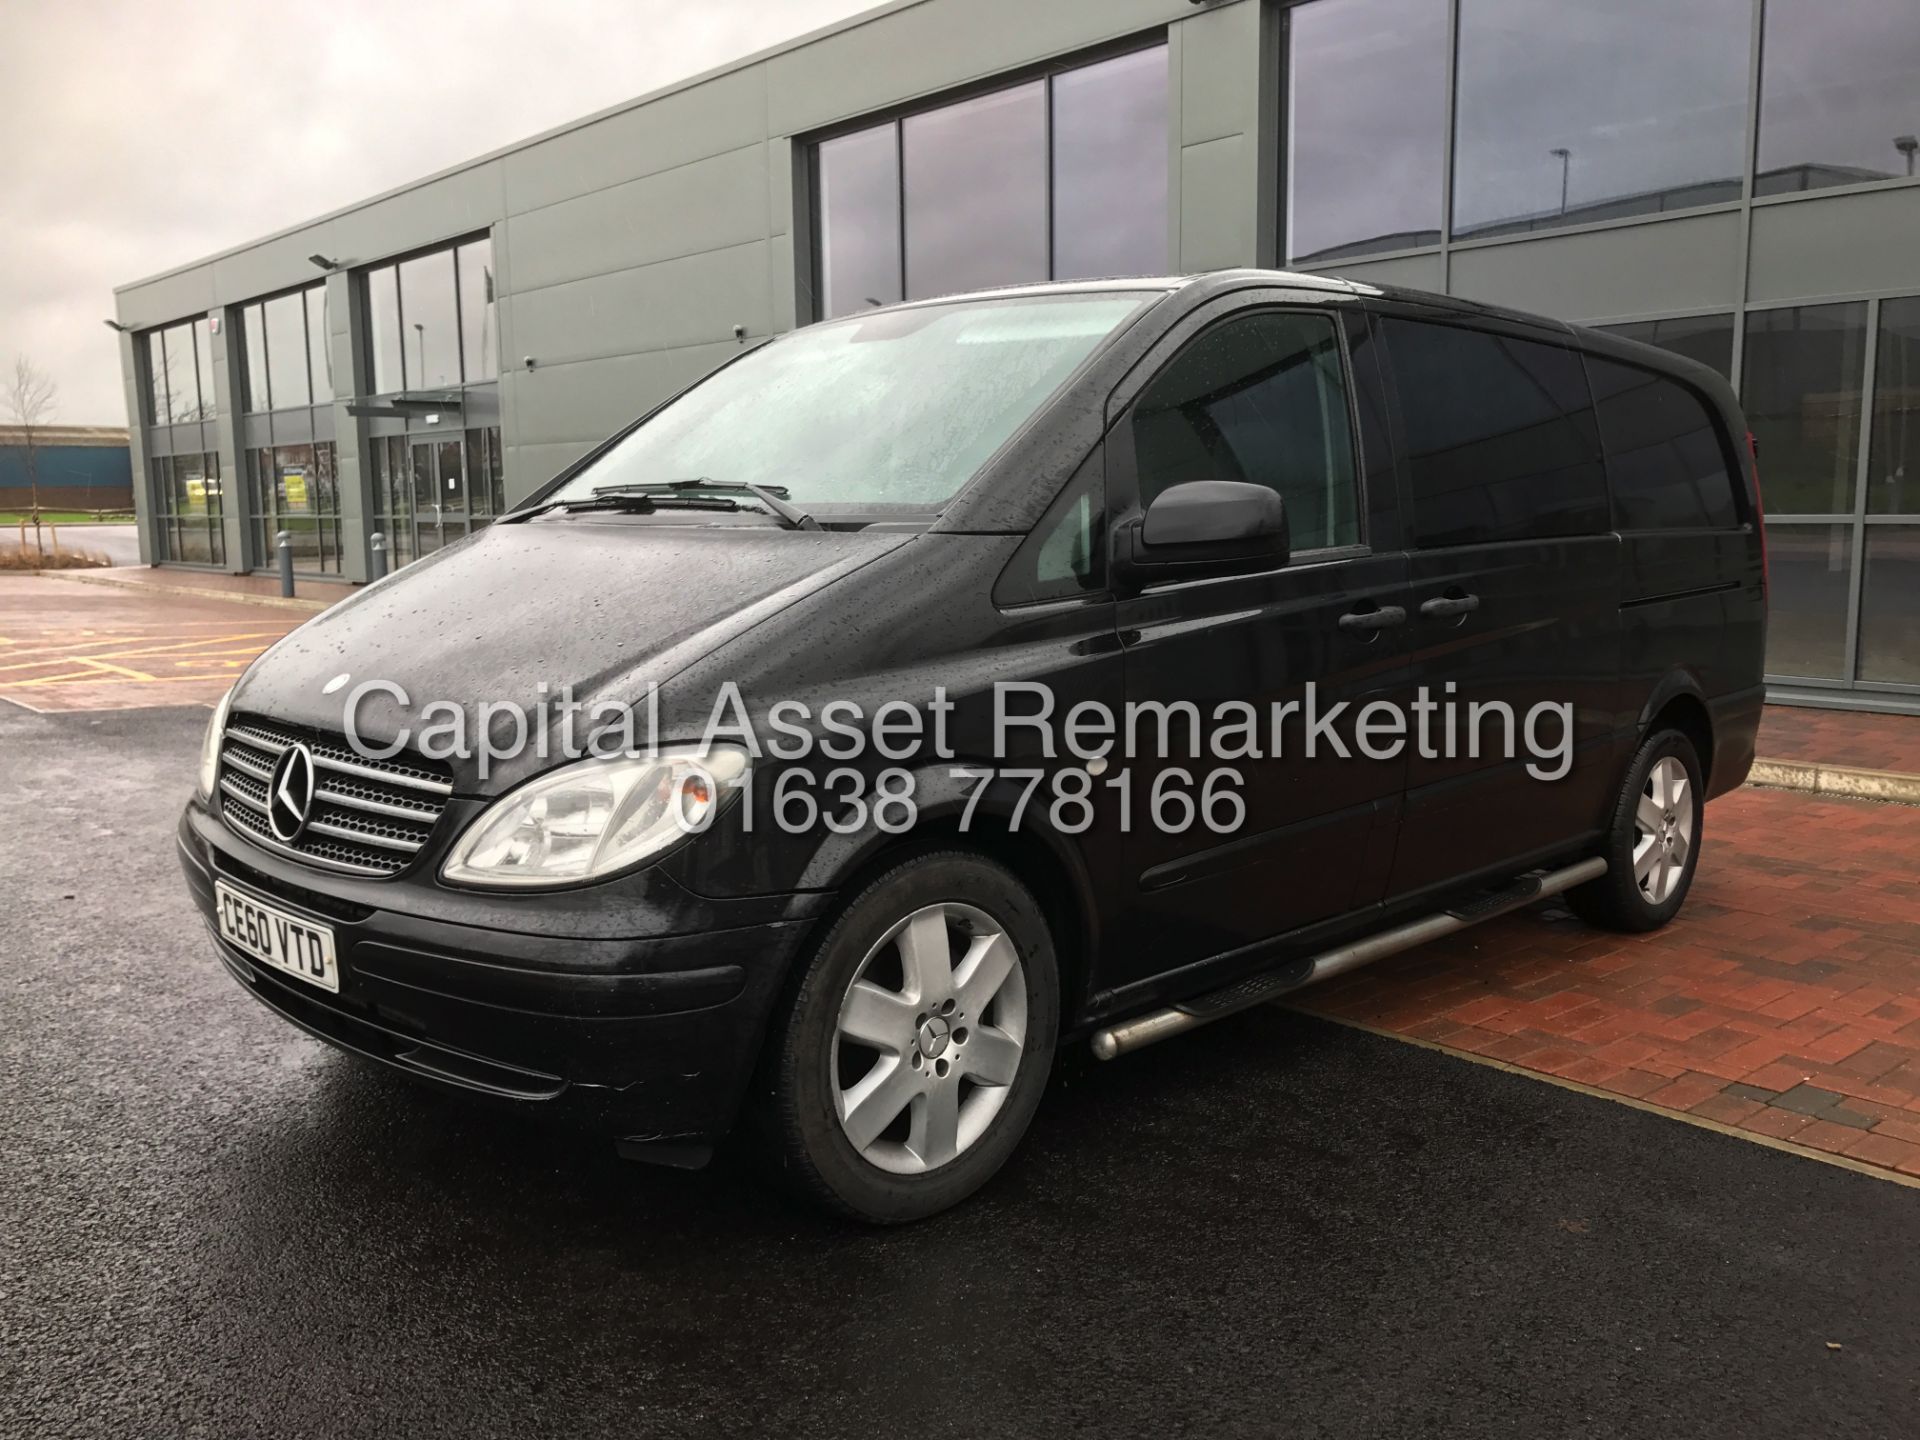 (ON SALE) MERCEDES VITO "SPORTY - 115BHP" LWB (2011 MODEL) 5 SEATER DUELINER -1 OWNER-AIR CON-ALLOYS - Bild 4 aus 18